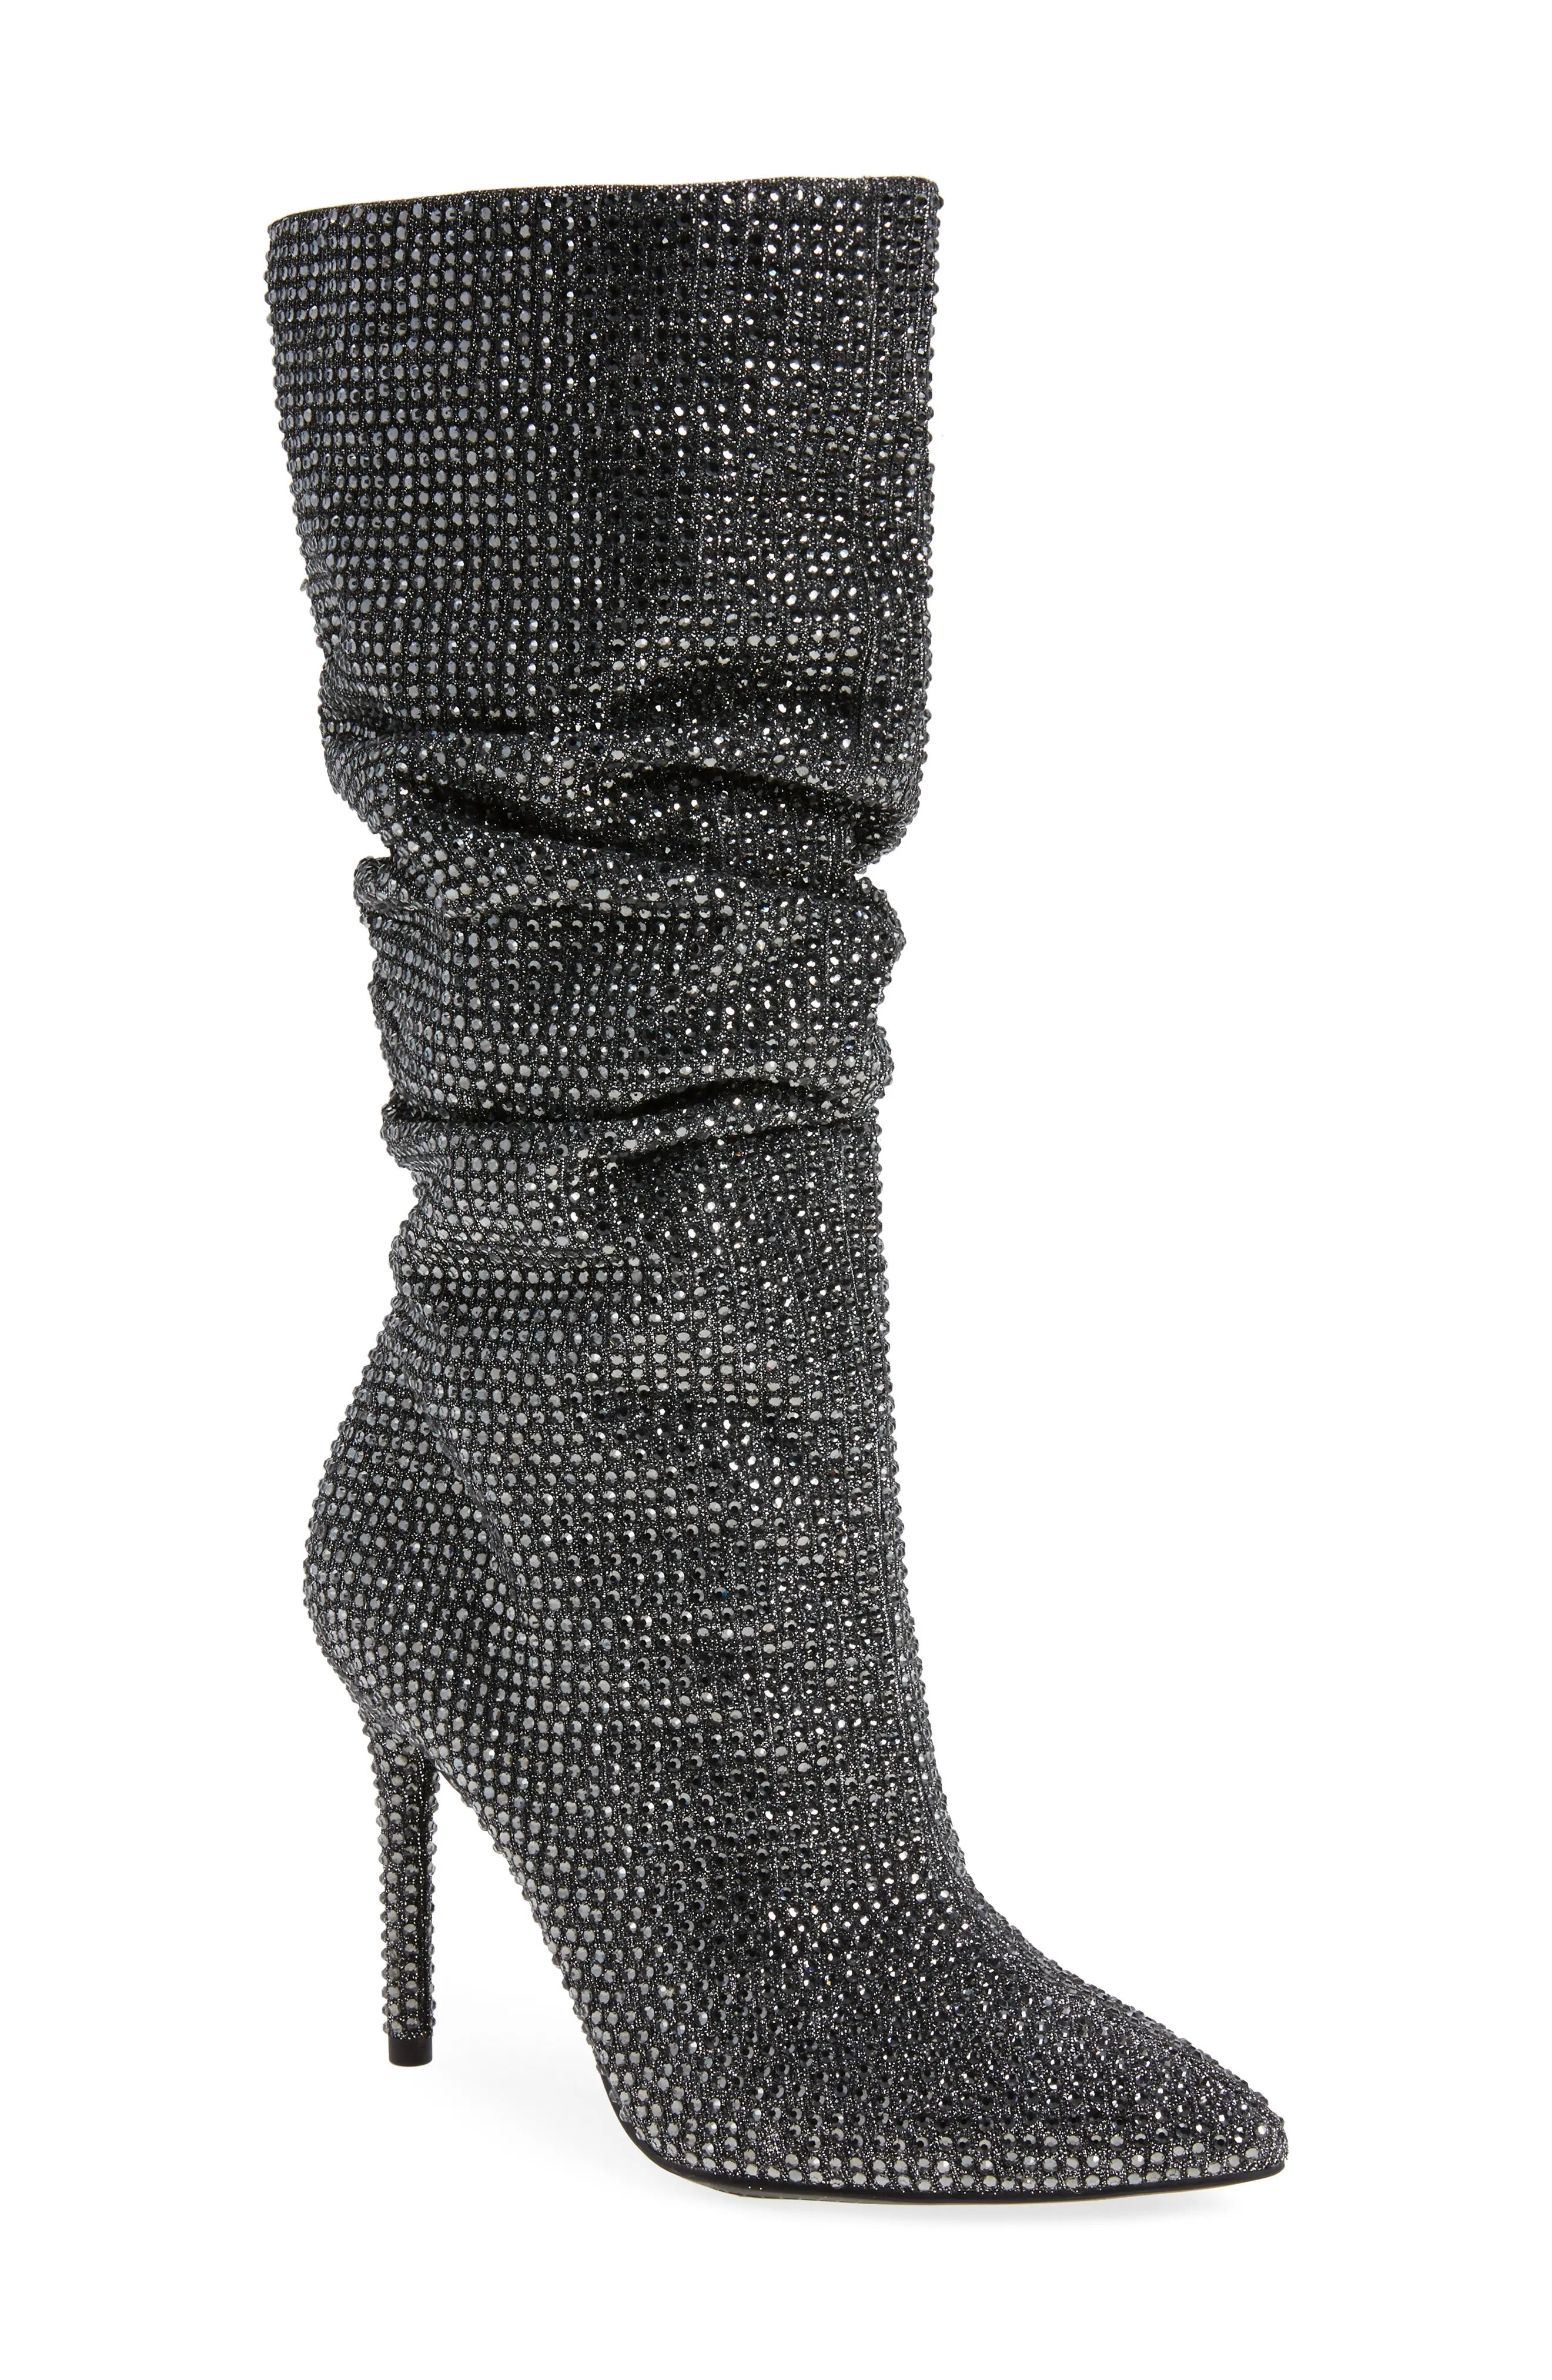 Jessica Simpson Layzer Embellished Slouch Boot (Women) | Nordstrom